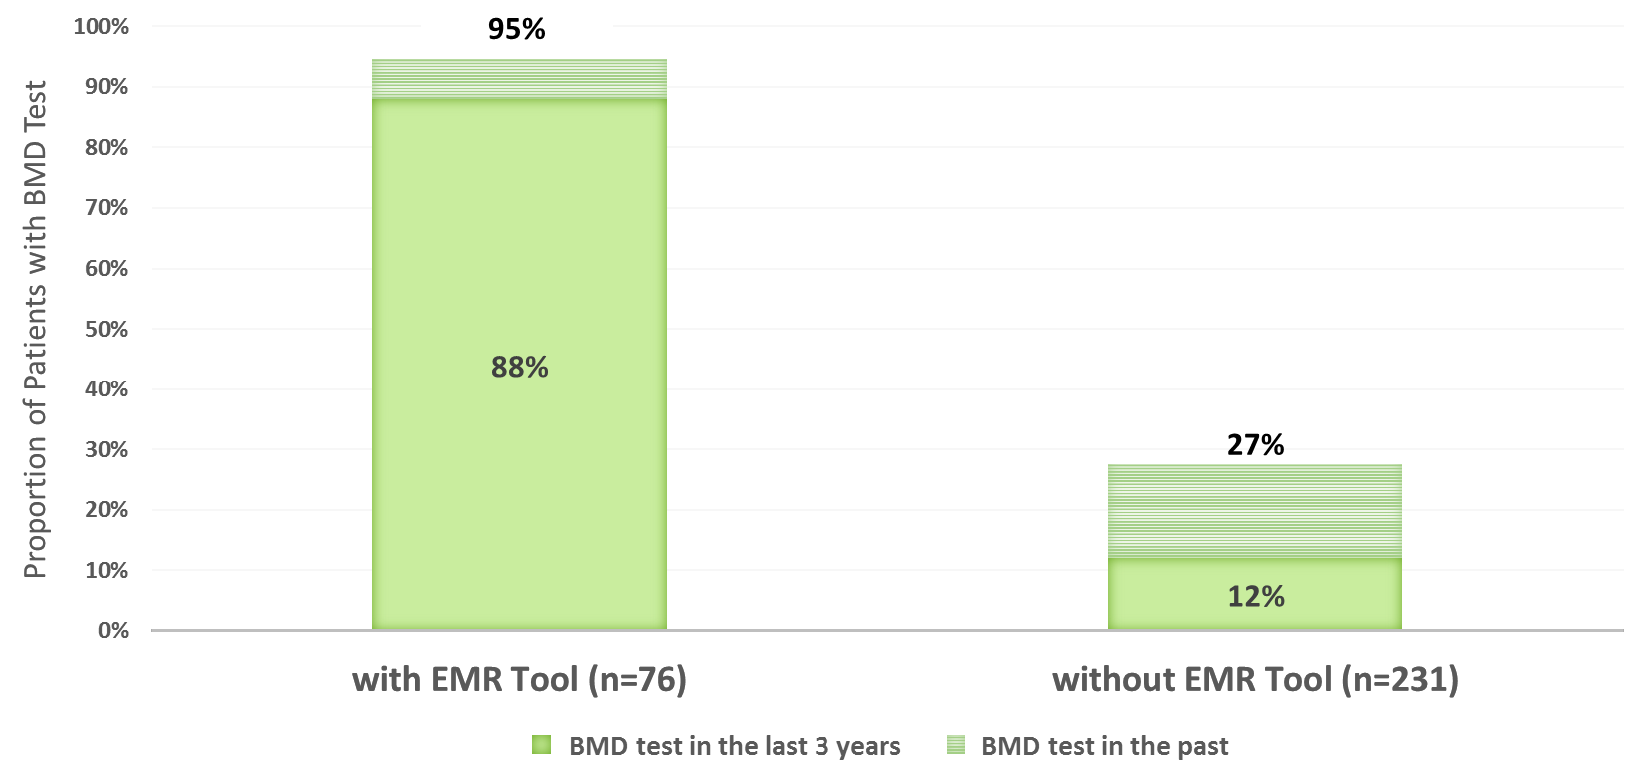 Figure 2. BMD testing among patients at risk for osteoporosis managed with the osteoporosis EMR tool compared to patients not managed with the tool.  